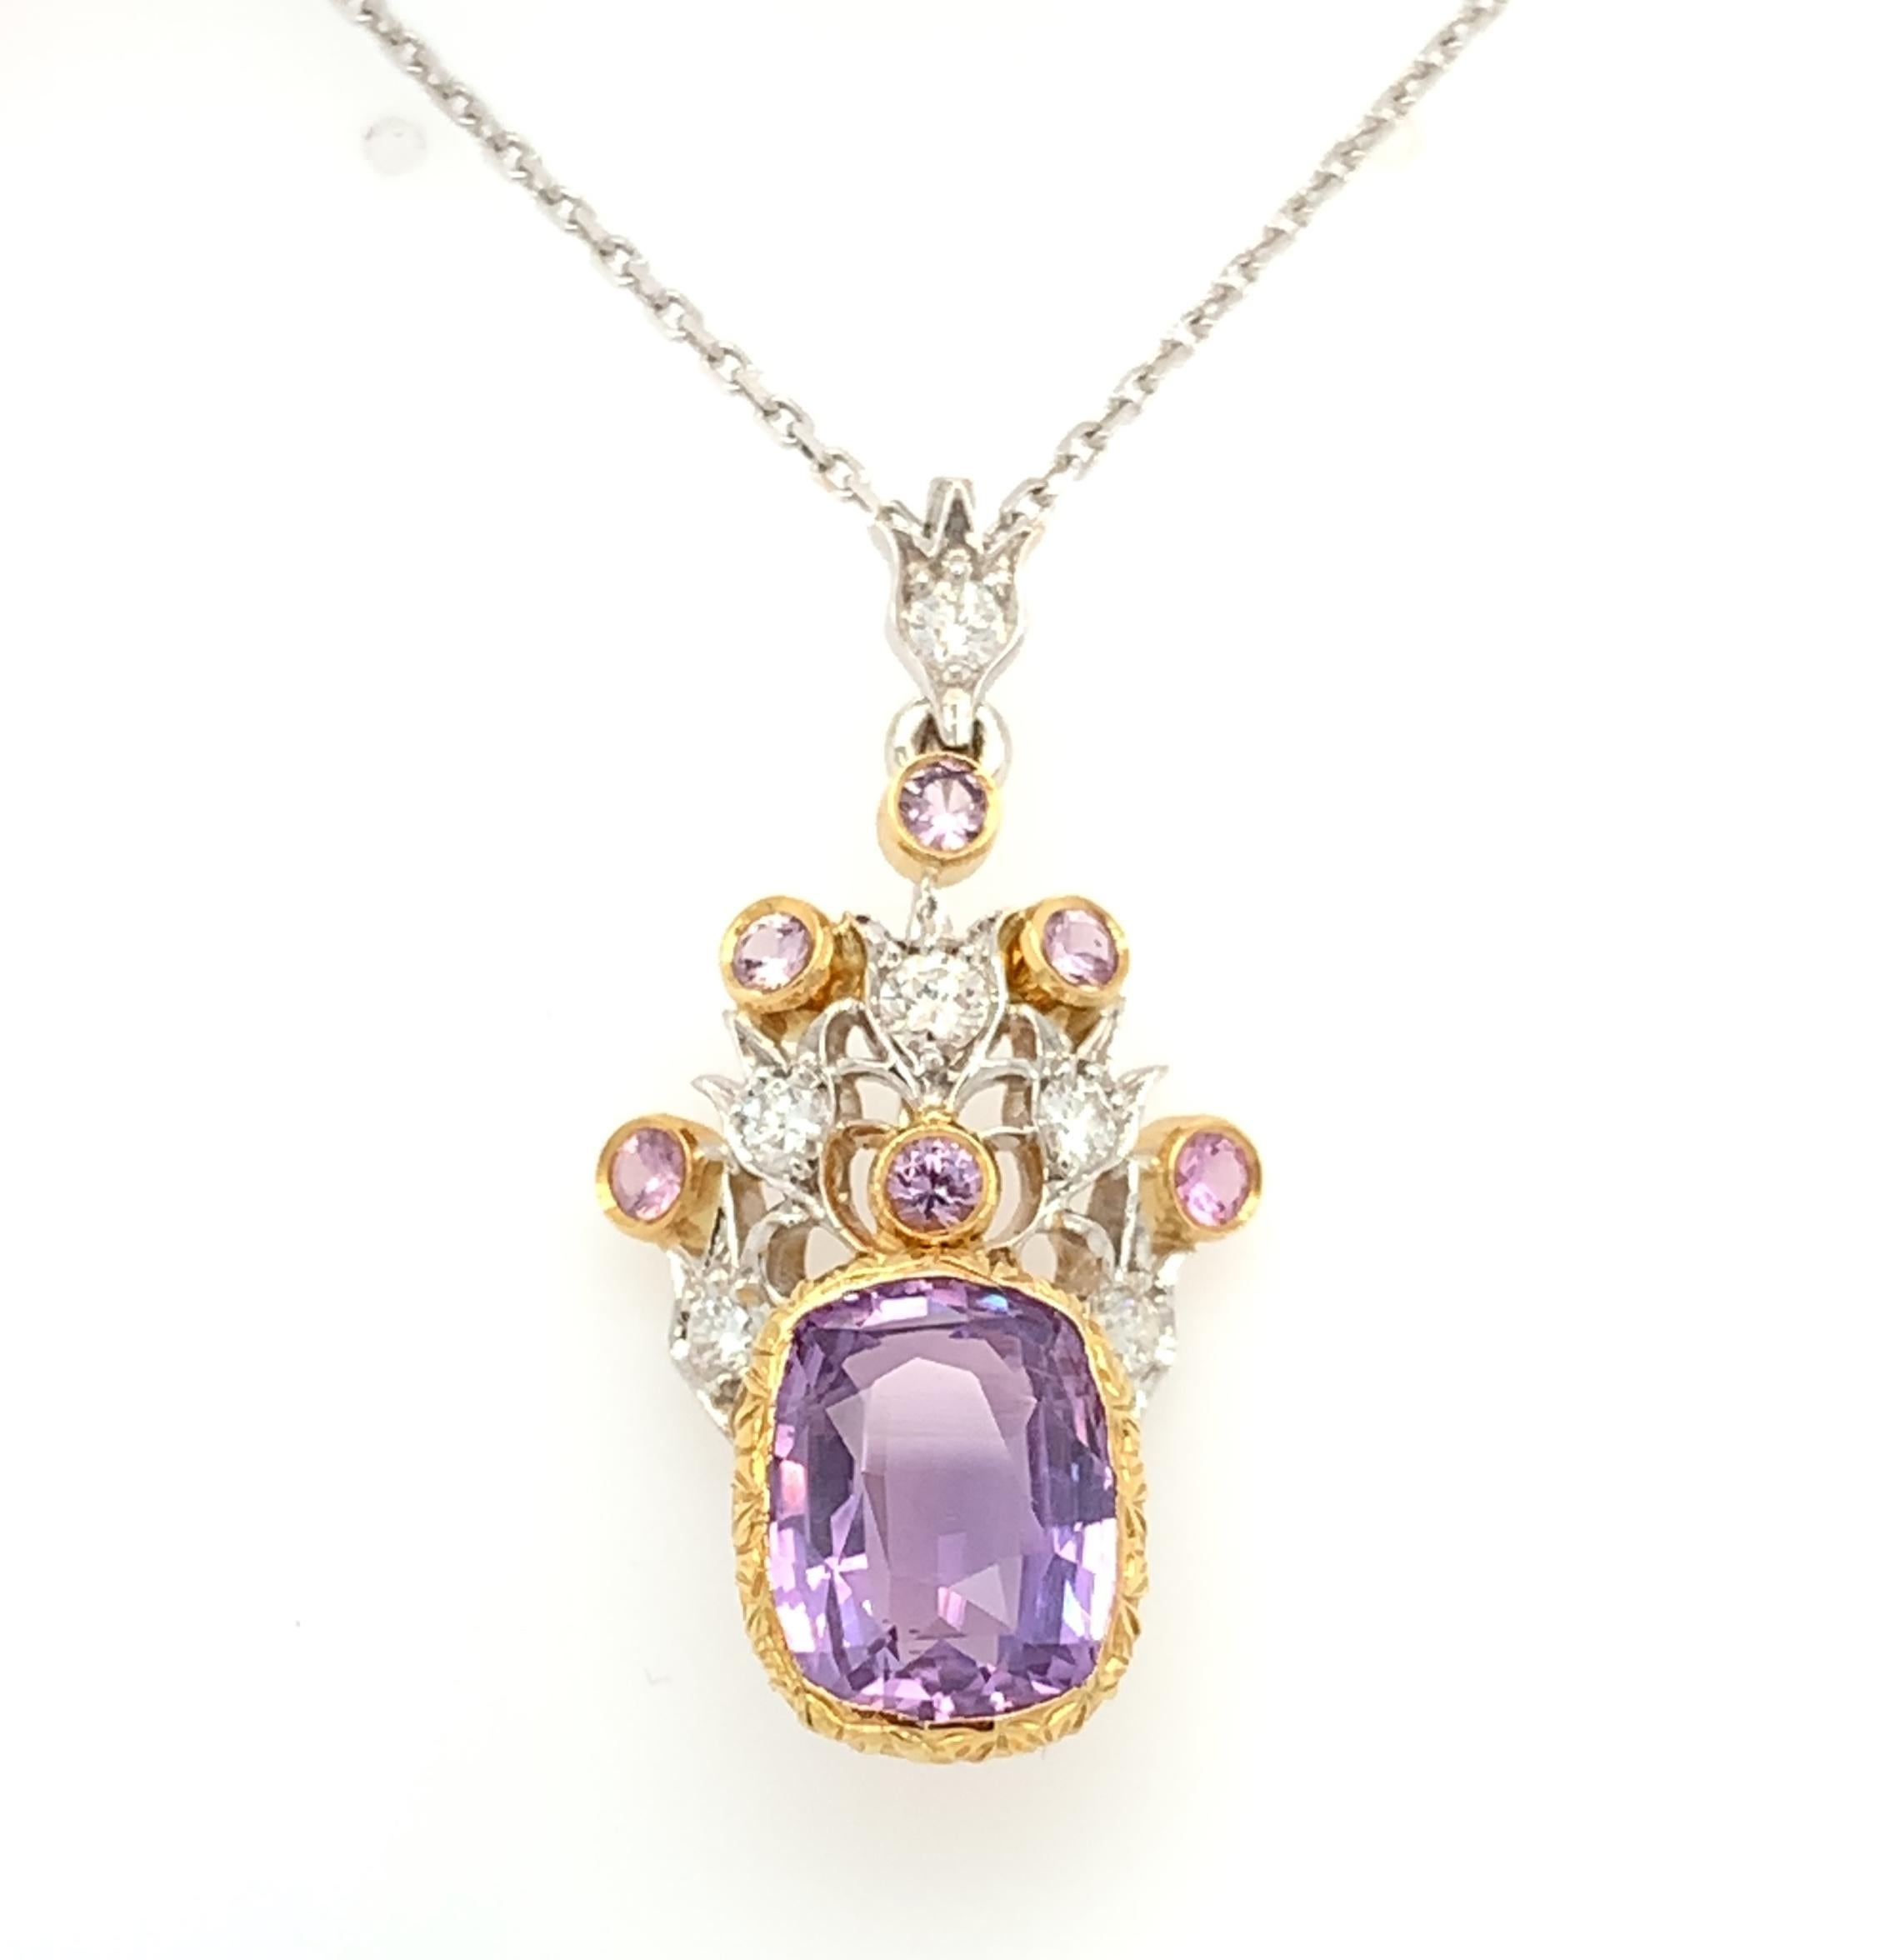 This one-of-a-kind pendant features a bright cushion-cut sapphire with a gorgeous lavender color. Set with pink sapphires and sparkling diamonds, this is a regal design you will want to wear time and time again. Handmade in 18k yellow and white gold